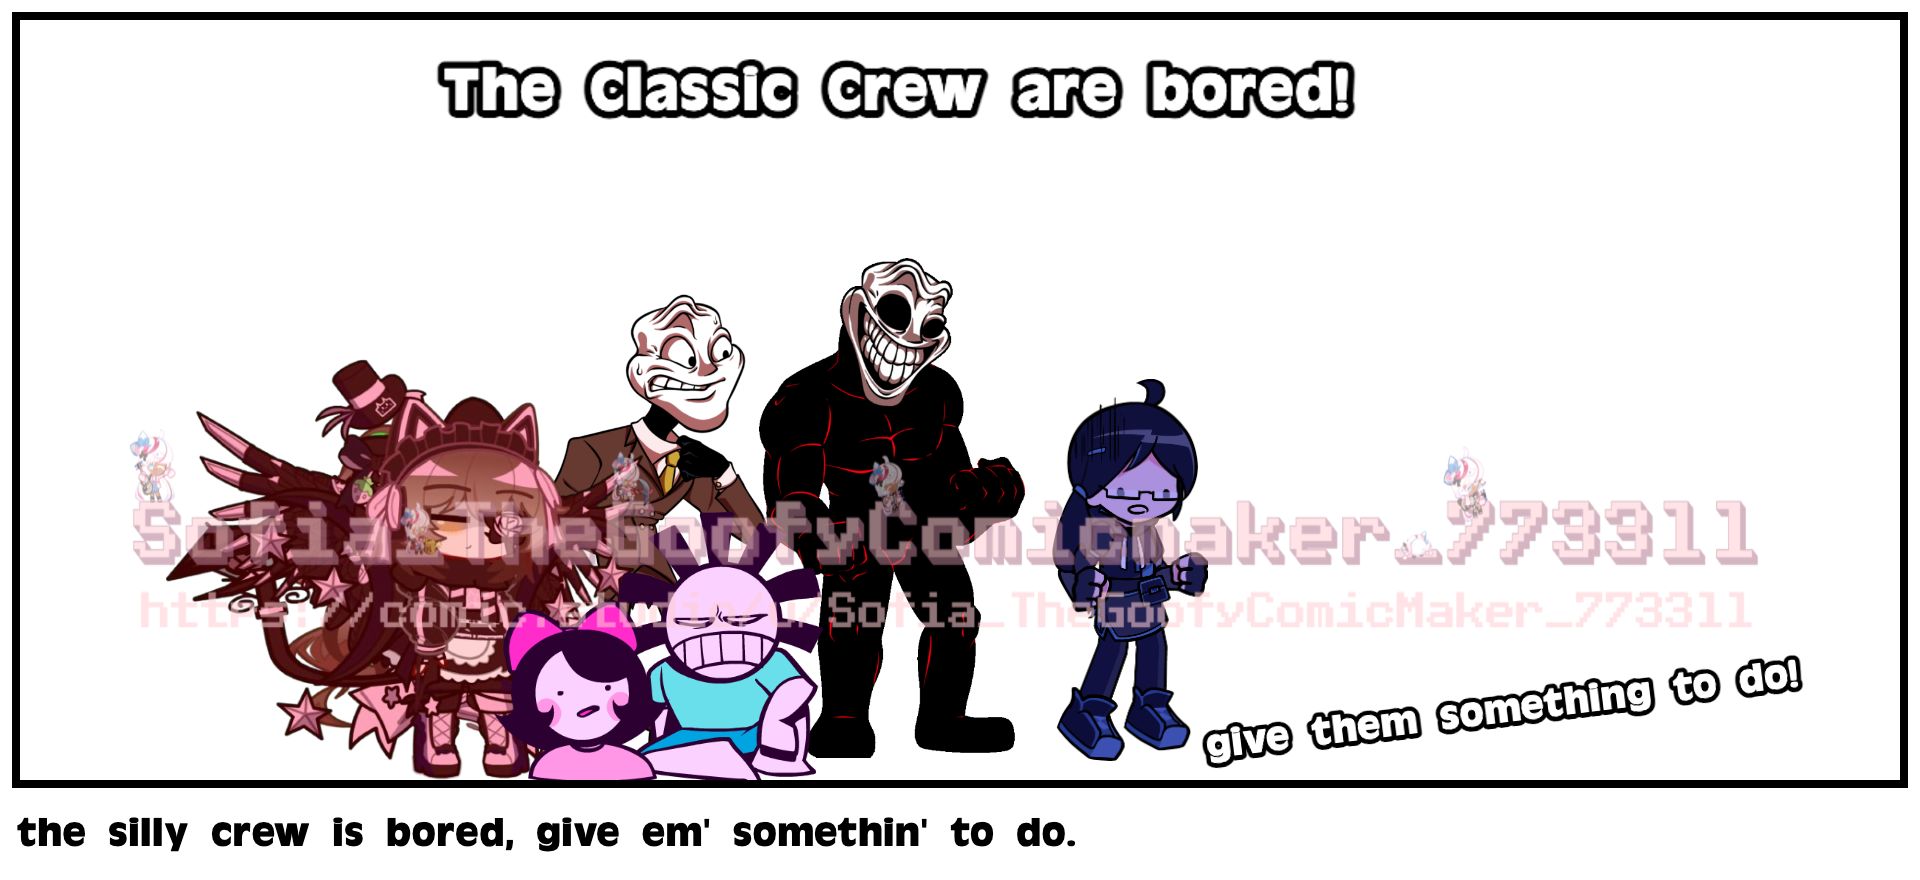 the silly crew is bored, give em' somethin' to do.